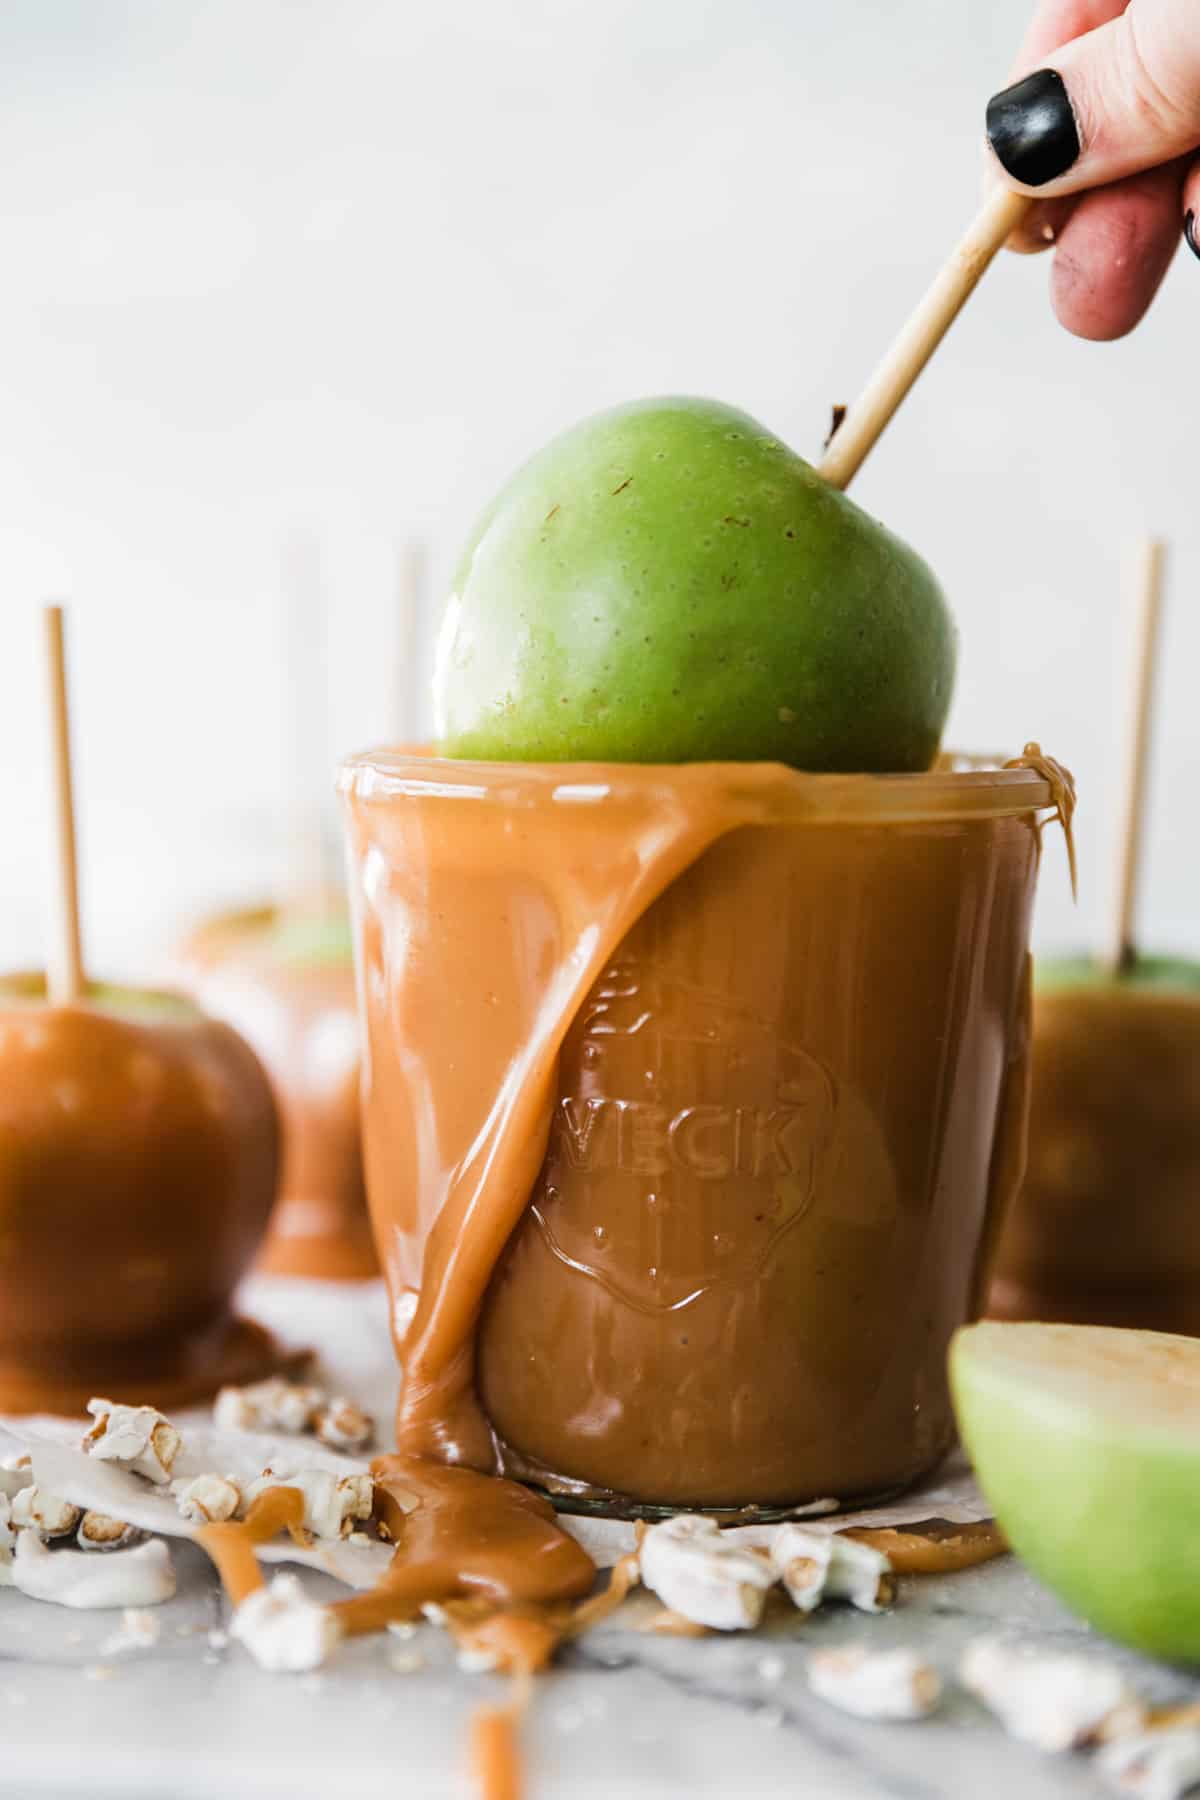 Green apple on a stick being dipped into a cup of overflowing warm sticky caramel. 